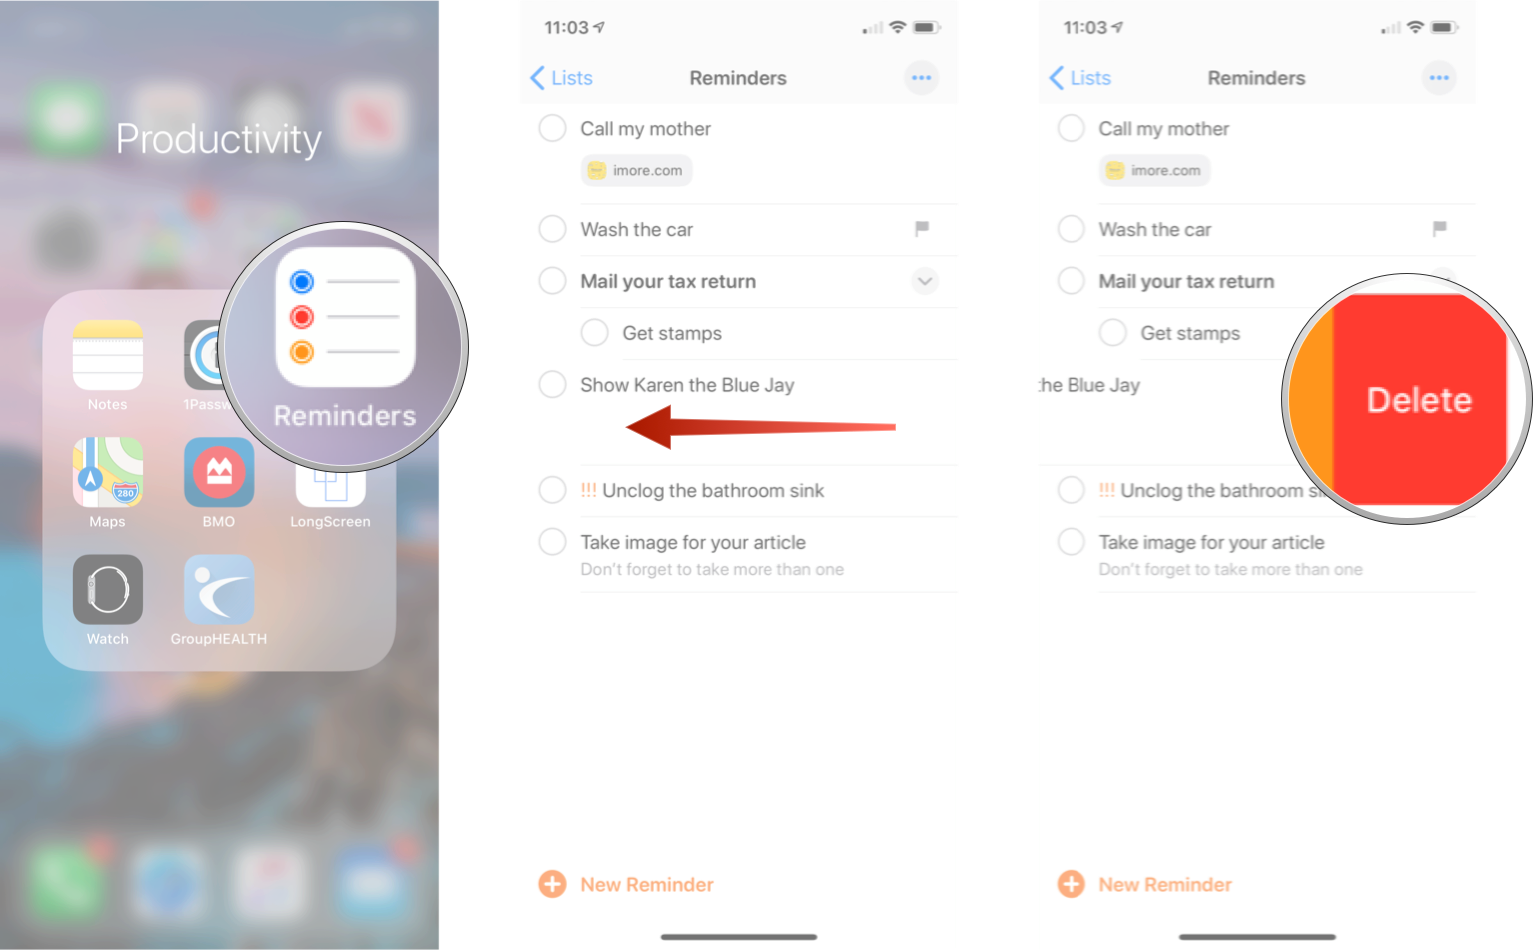 Delete Tasks in Reminders: Launch Reminders, swipe left n the reminder you want to delete, and then tap delete. 